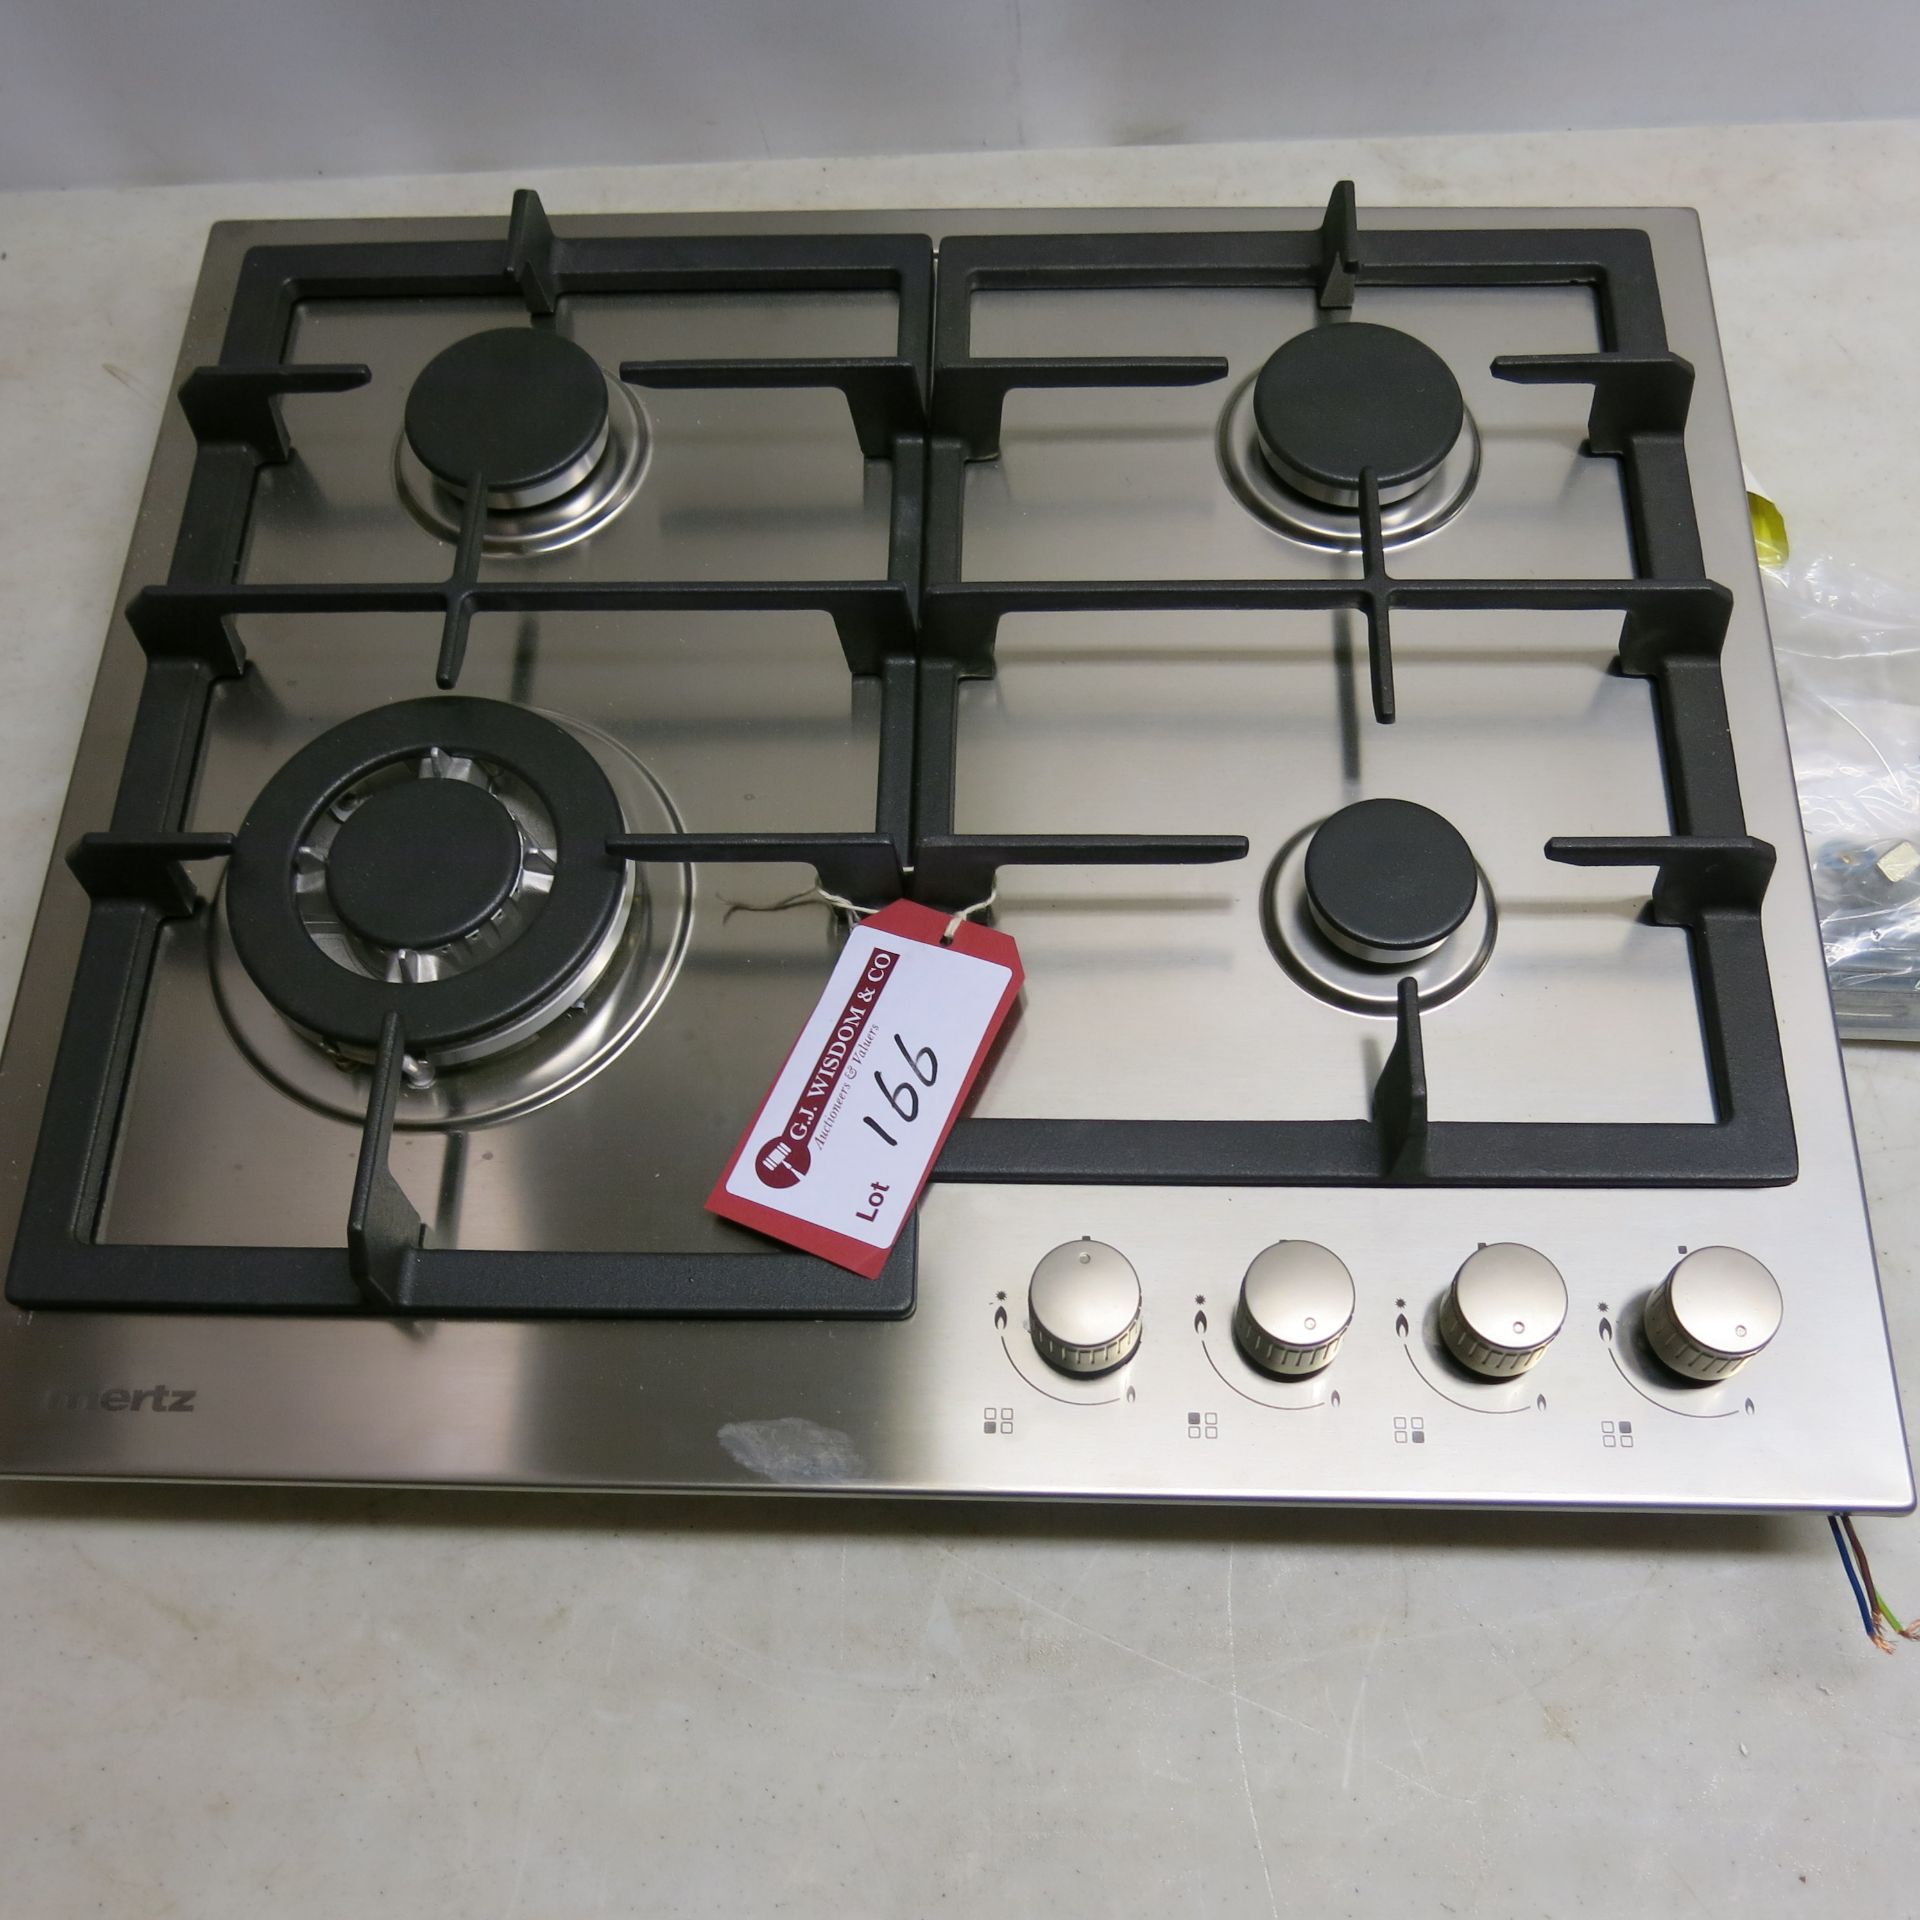 Mertz Stainless Steel 4 Ring Gas Hob, Model MG630SS. Size 60cm x 50cm with Tools & Fittings. New/